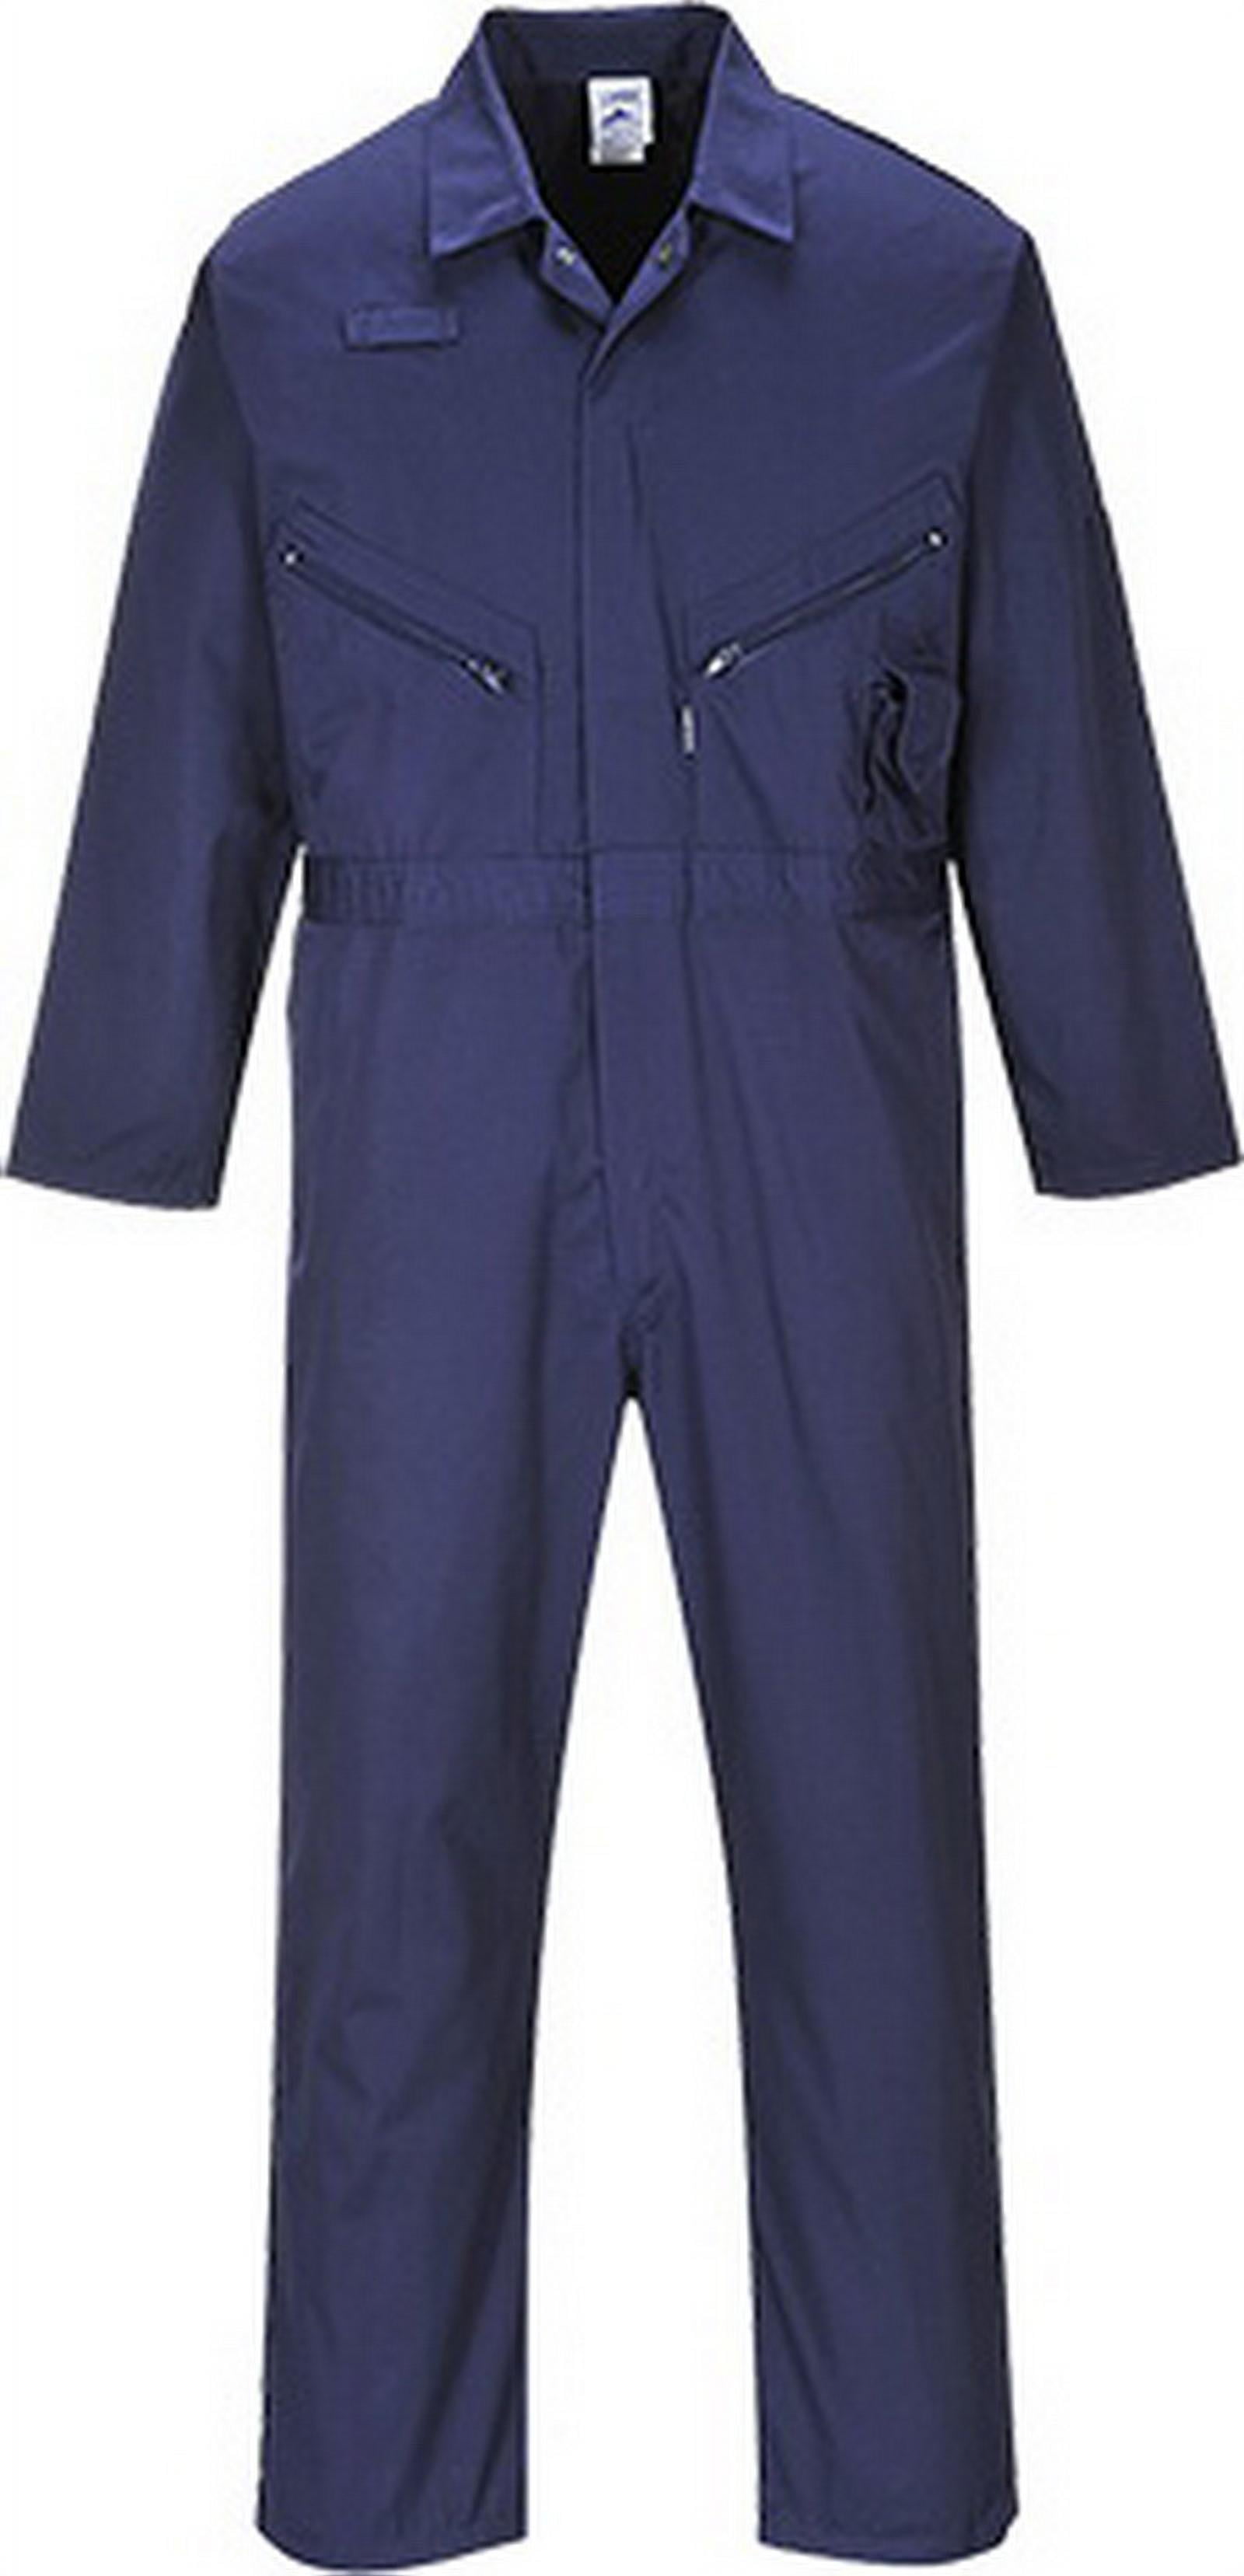 tall PORTWEST S999 sz XXL Navy Work Euro Boiler Suit Coverall Overall PPE 